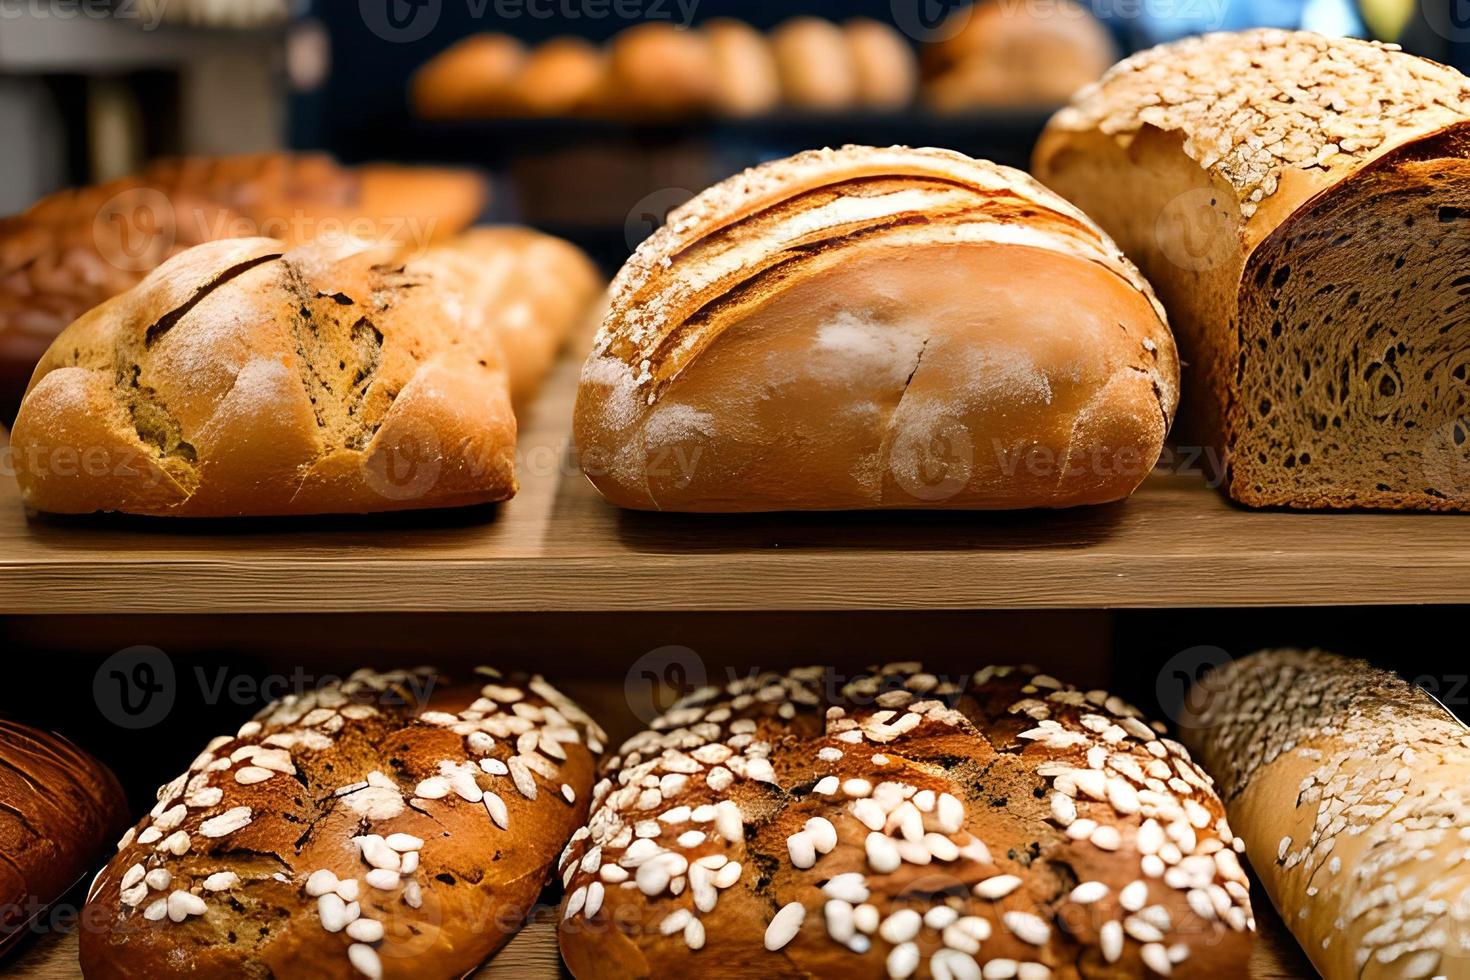 Various bread selling at the display bakery shop shelf. photo